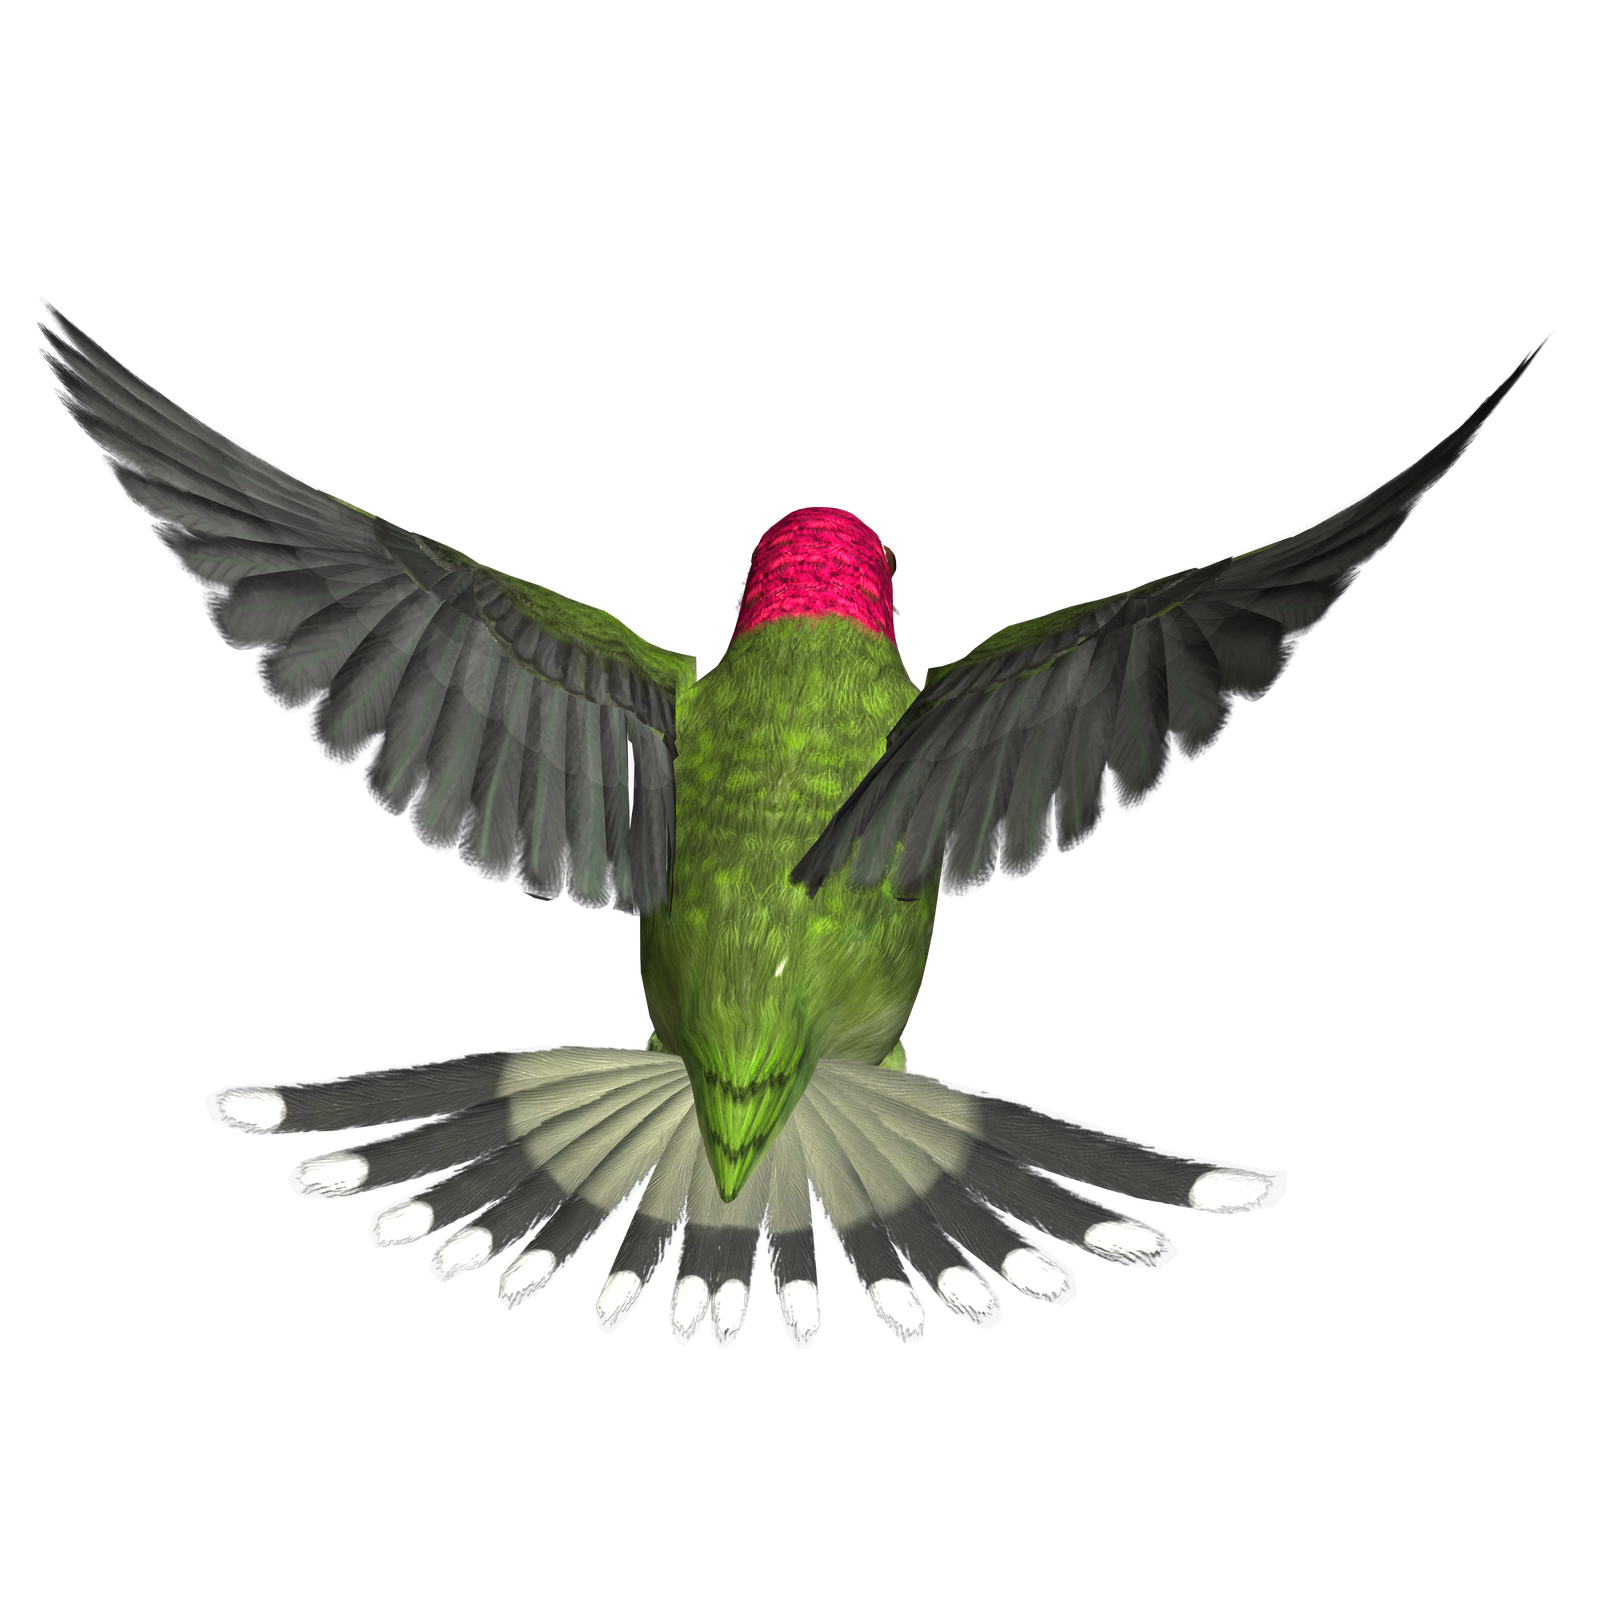 Free High Resolution graphics and clip art: bird png graphics